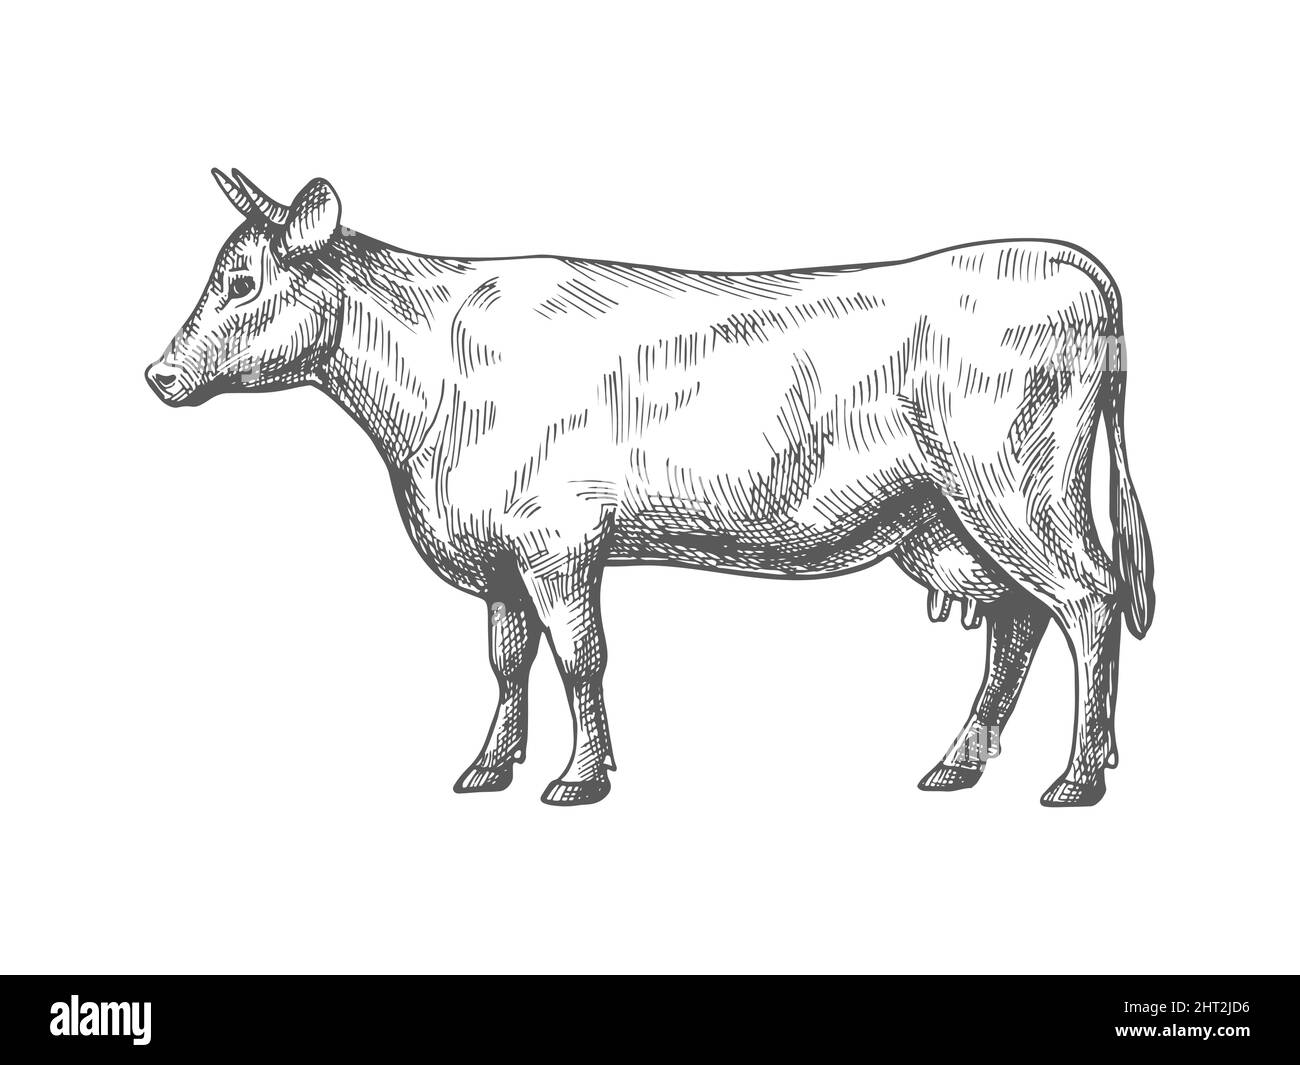 Sketch of a cow. Vector vintage illustration of hand drawn cow sketch isolated on white background. Stock Vector